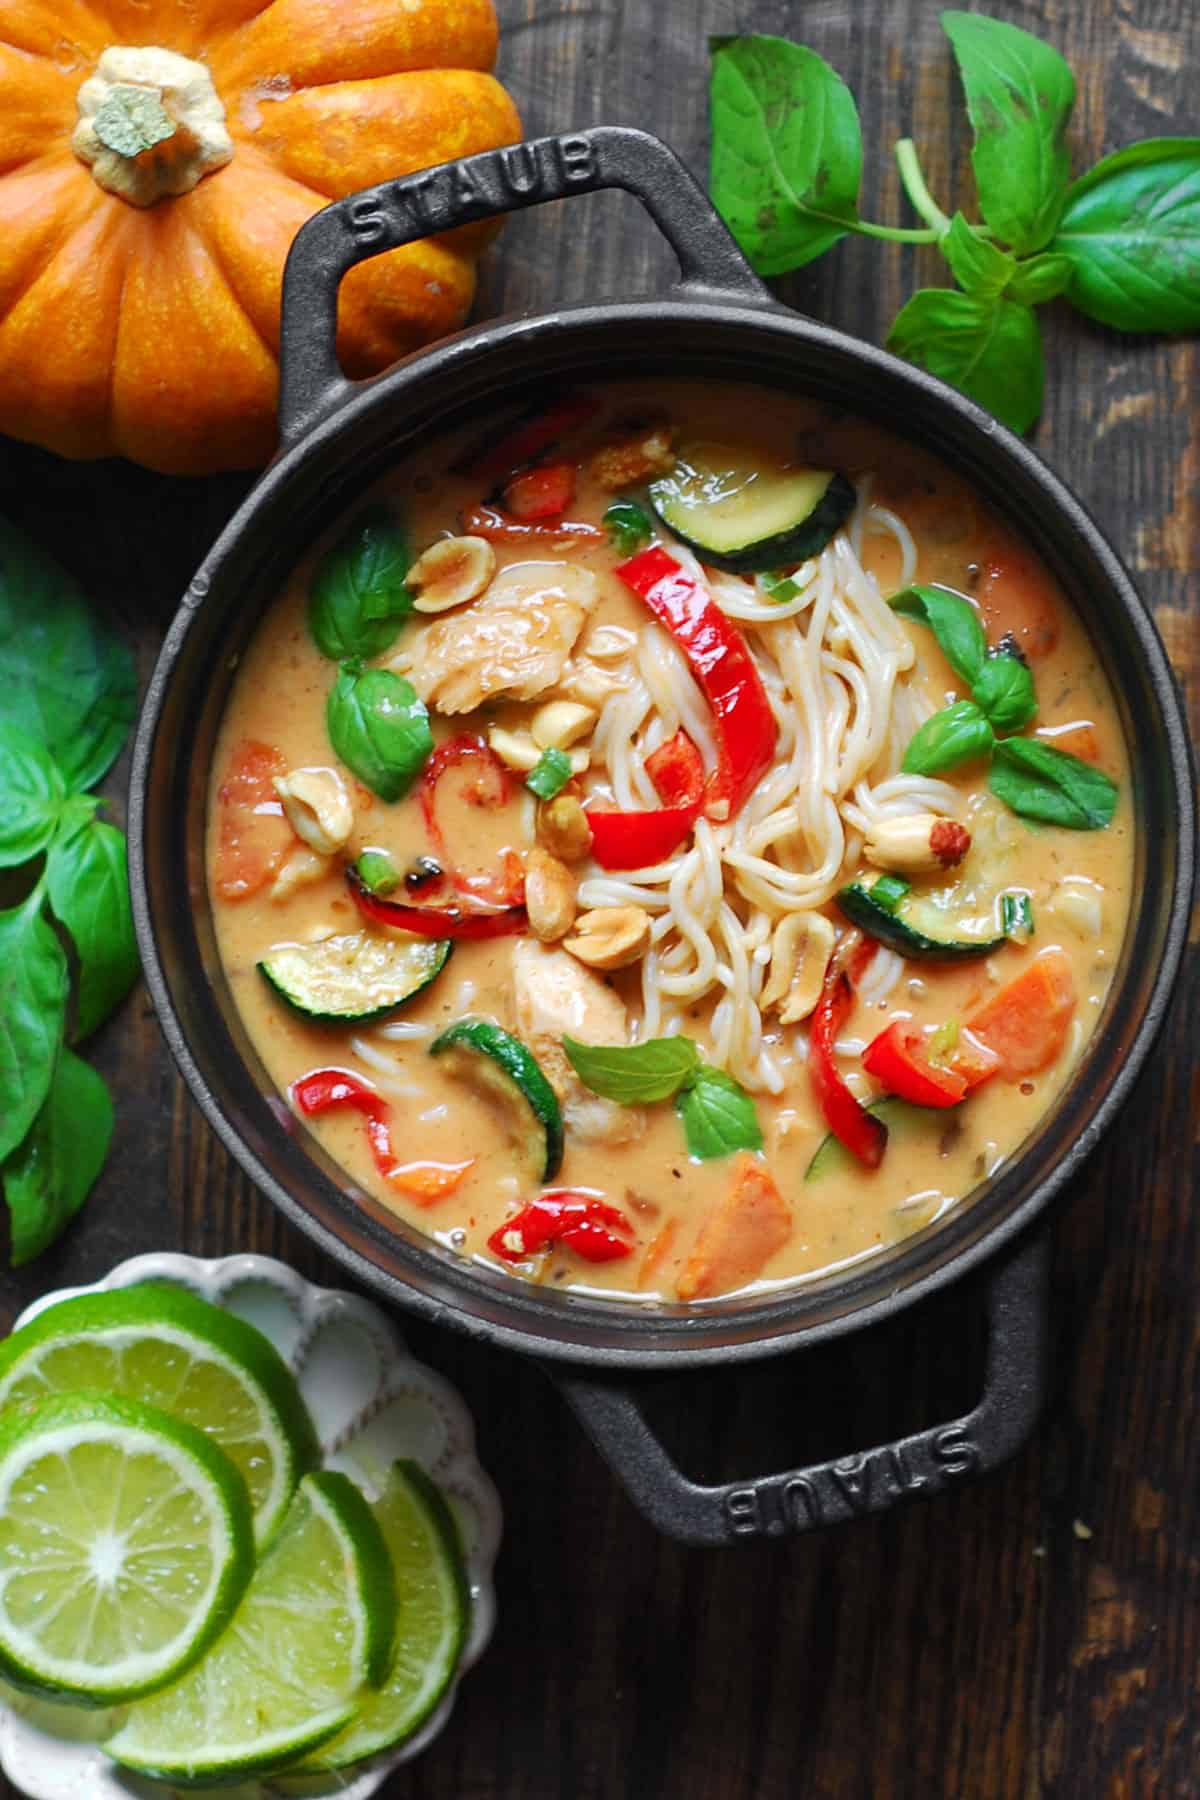 Thai-inspired Red Curry Noodle Soup with chicken, coconut broth, lime juice, red bell peppers, zucchini, carrots, and peanuts - in a small cast iron pan.